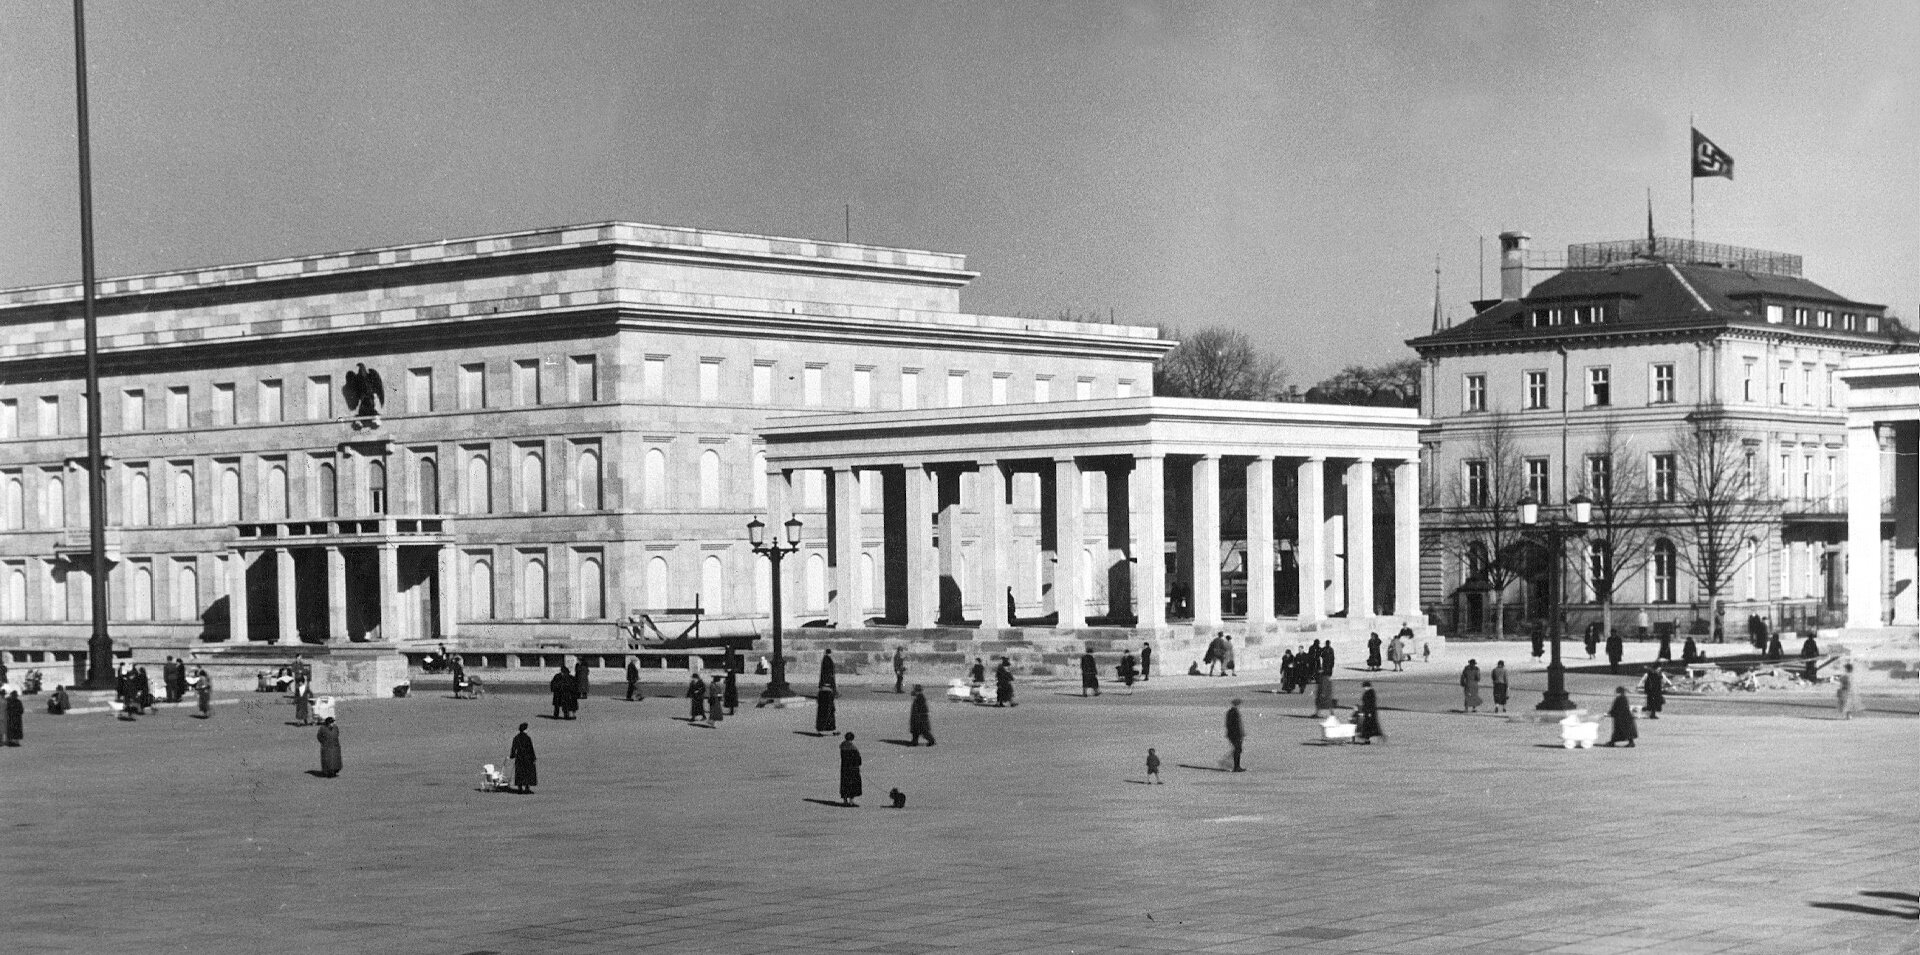 A square paved with granite slabs. On the right is a long building, in the middle a hall of columns, and on the right a building with a swastika flag. People are walking across the square. 